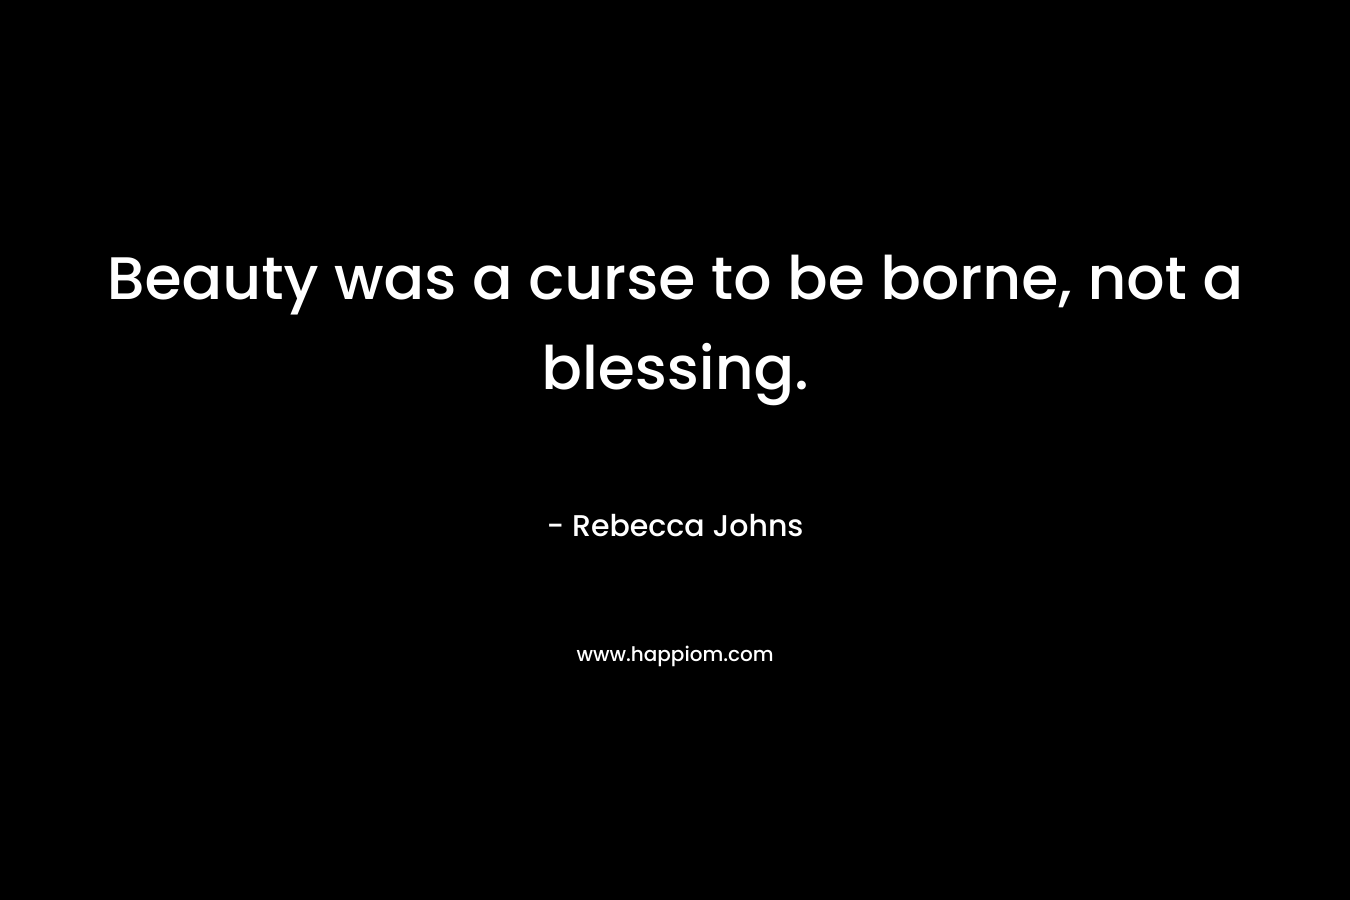 Beauty was a curse to be borne, not a blessing.